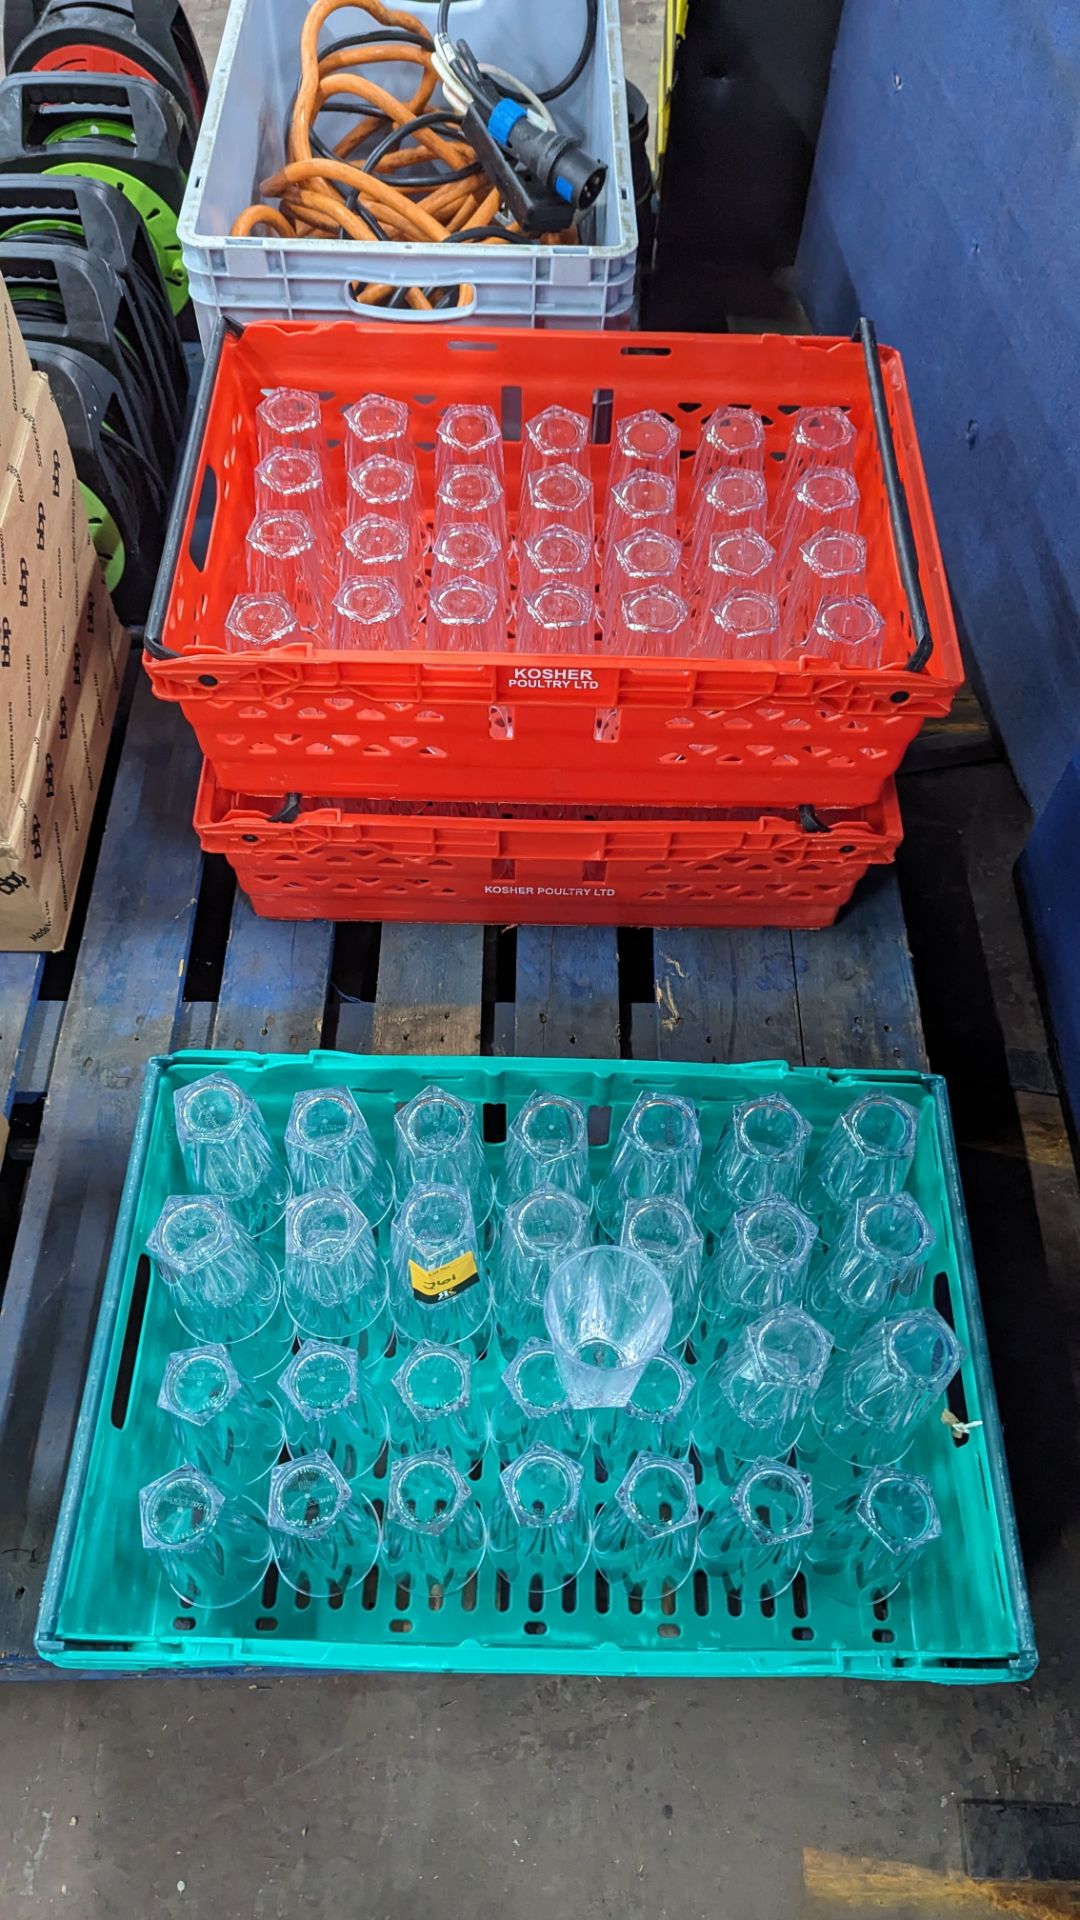 100 off plastic reusable tumblers - the contents of 3 crates - Image 7 of 7